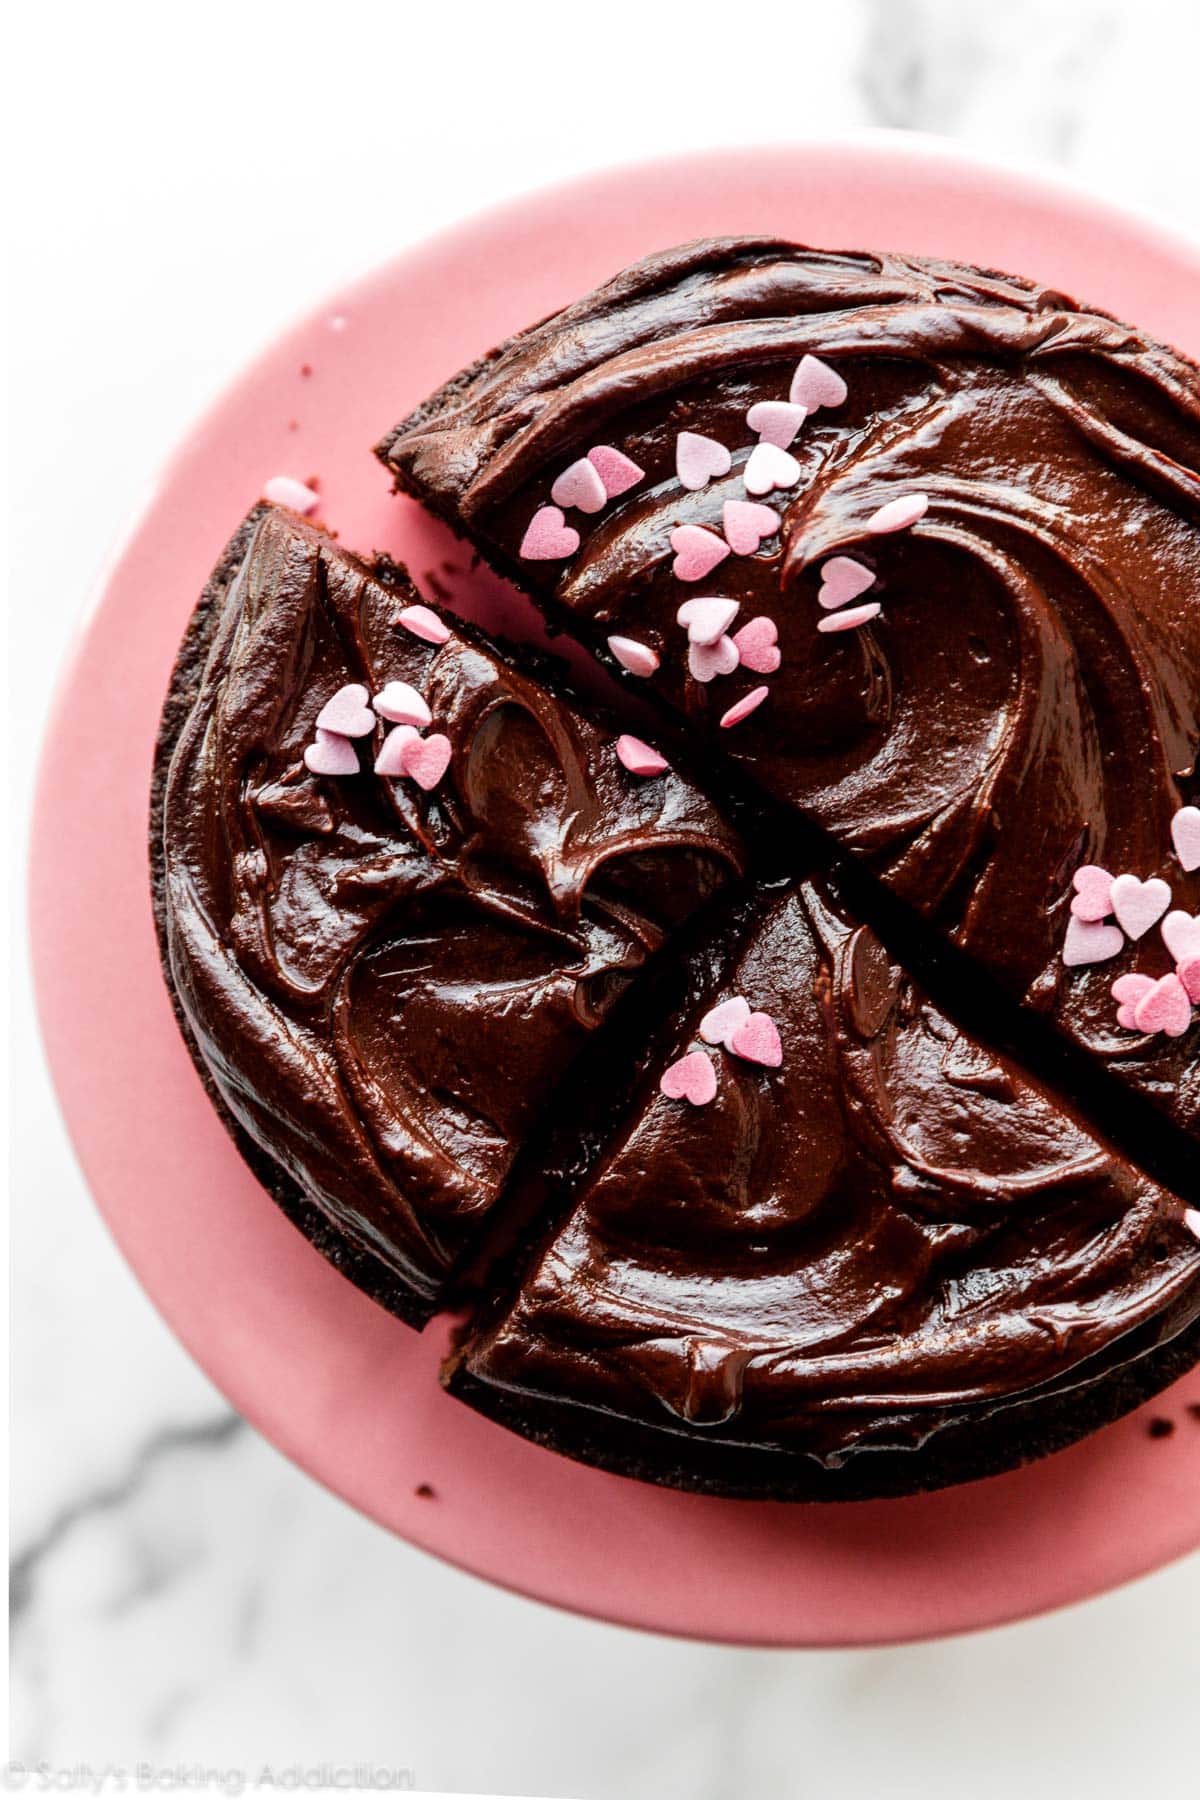 Top image of chocolate ganache and pink heart on chocolate cake